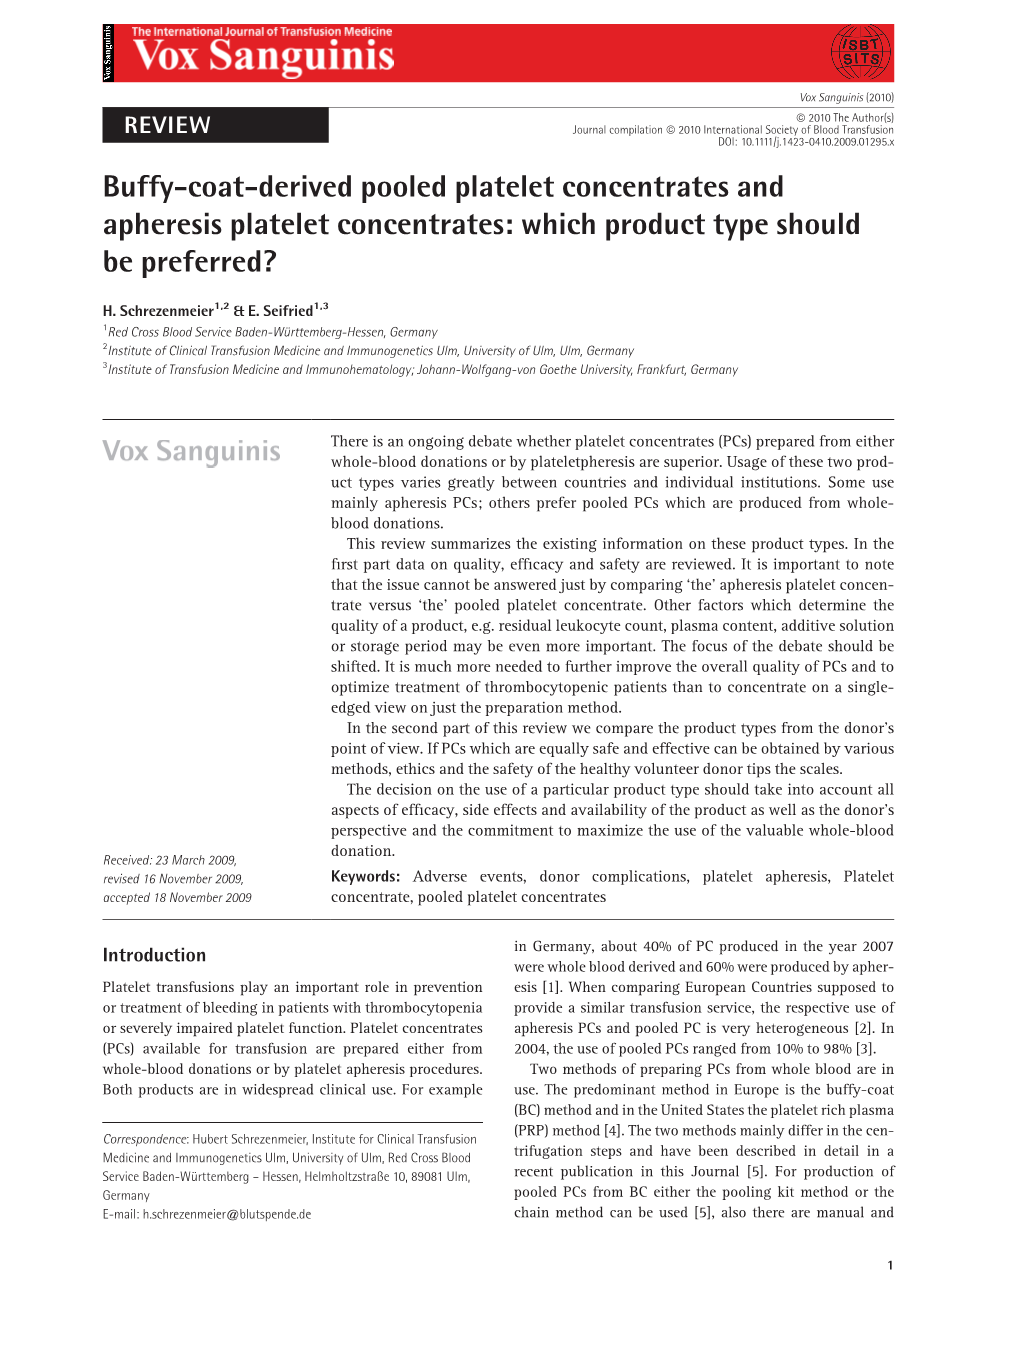 Buffy-Coat-Derived Pooled Platelet Concentrates and Apheresis Platelet Concentrates: Which Product Type Should Be Preferred?